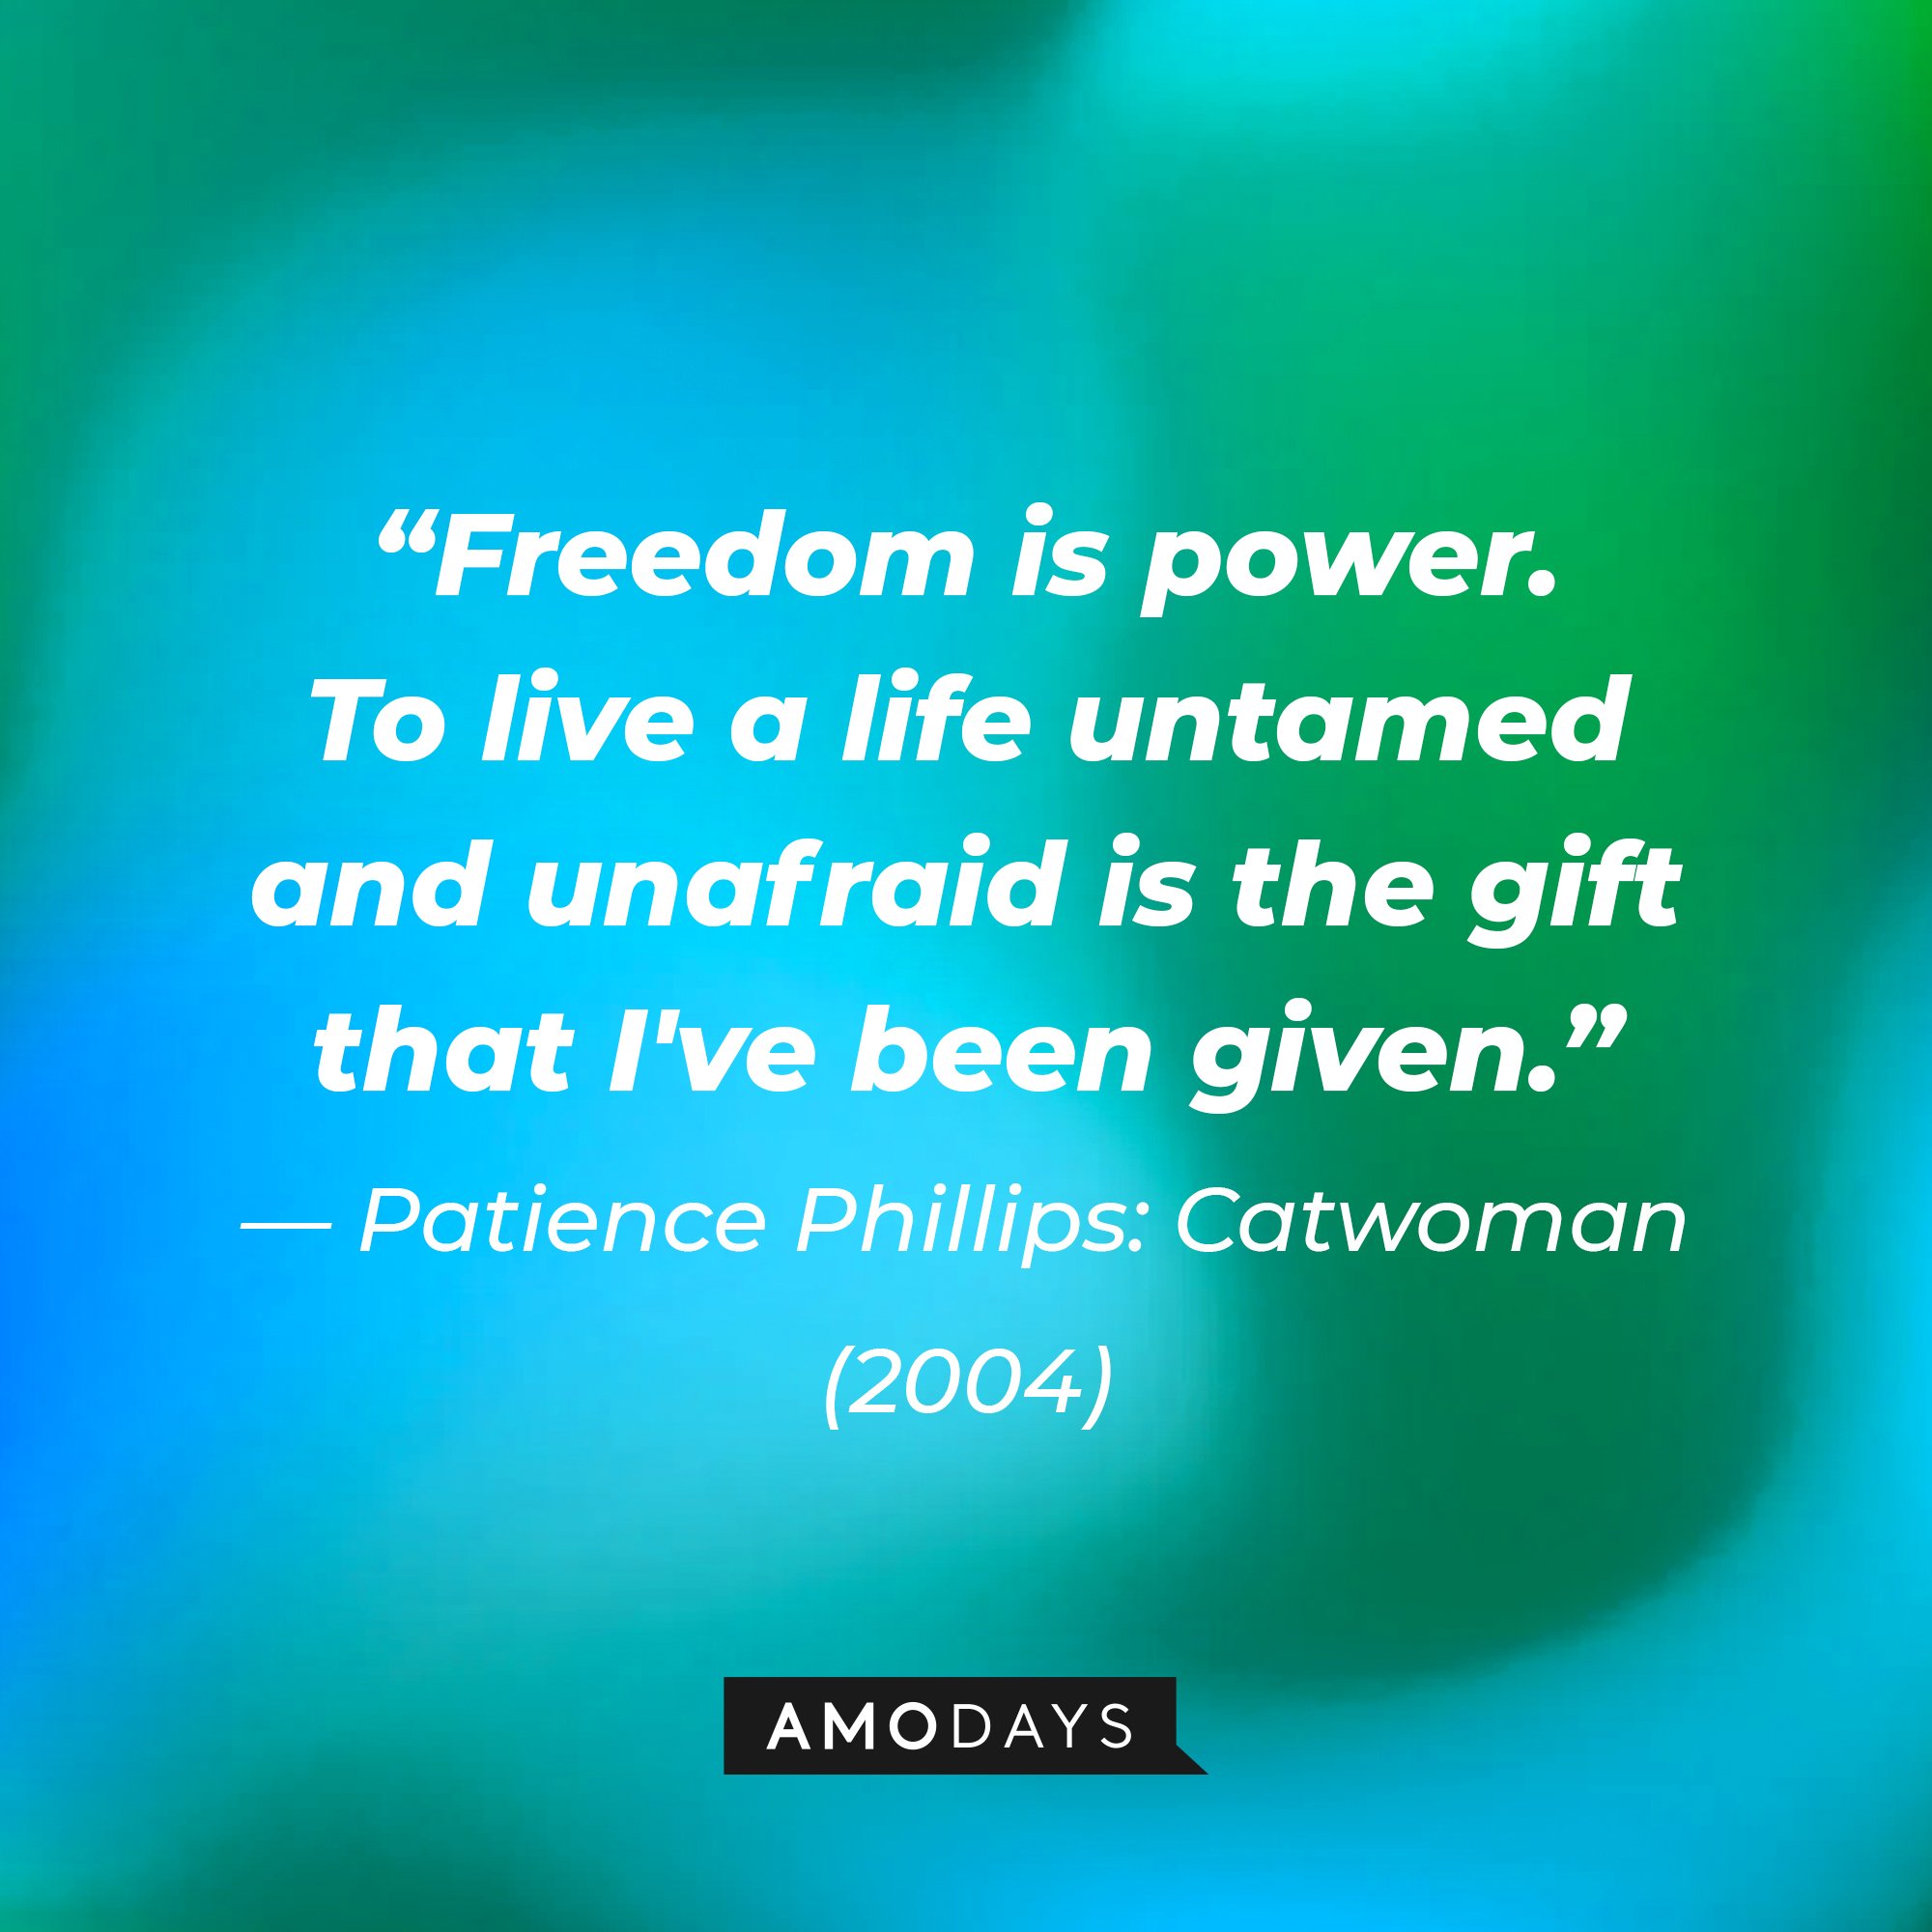 Catwoman from “Catwoman’s” (2004) quote “Freedom is power. To live a life untamed and unafraid is the gift that I've been given." | Image: AmoDays